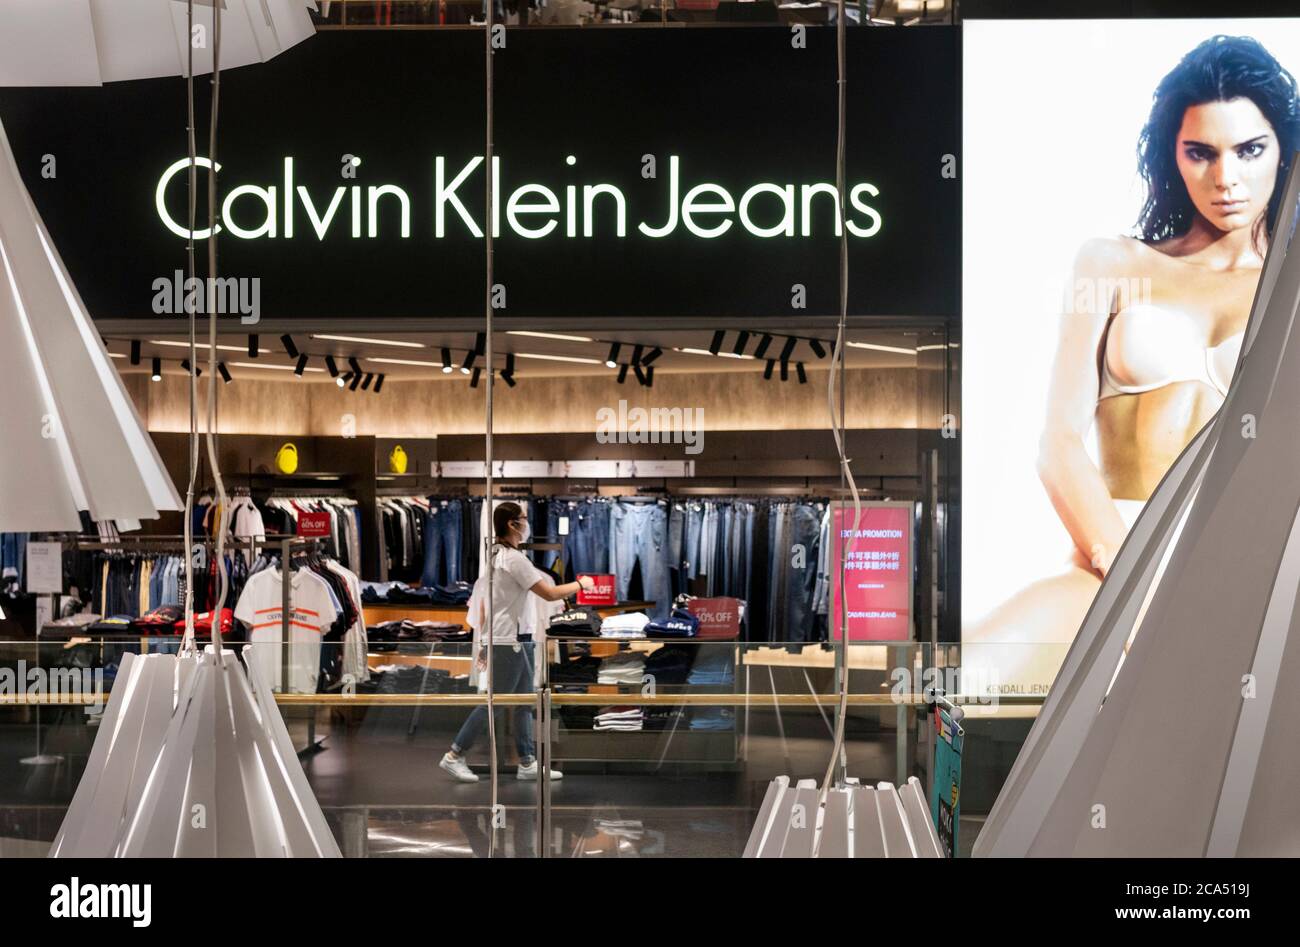 Calvin Klein Jeans Store High Resolution Stock Photography and Images -  Alamy